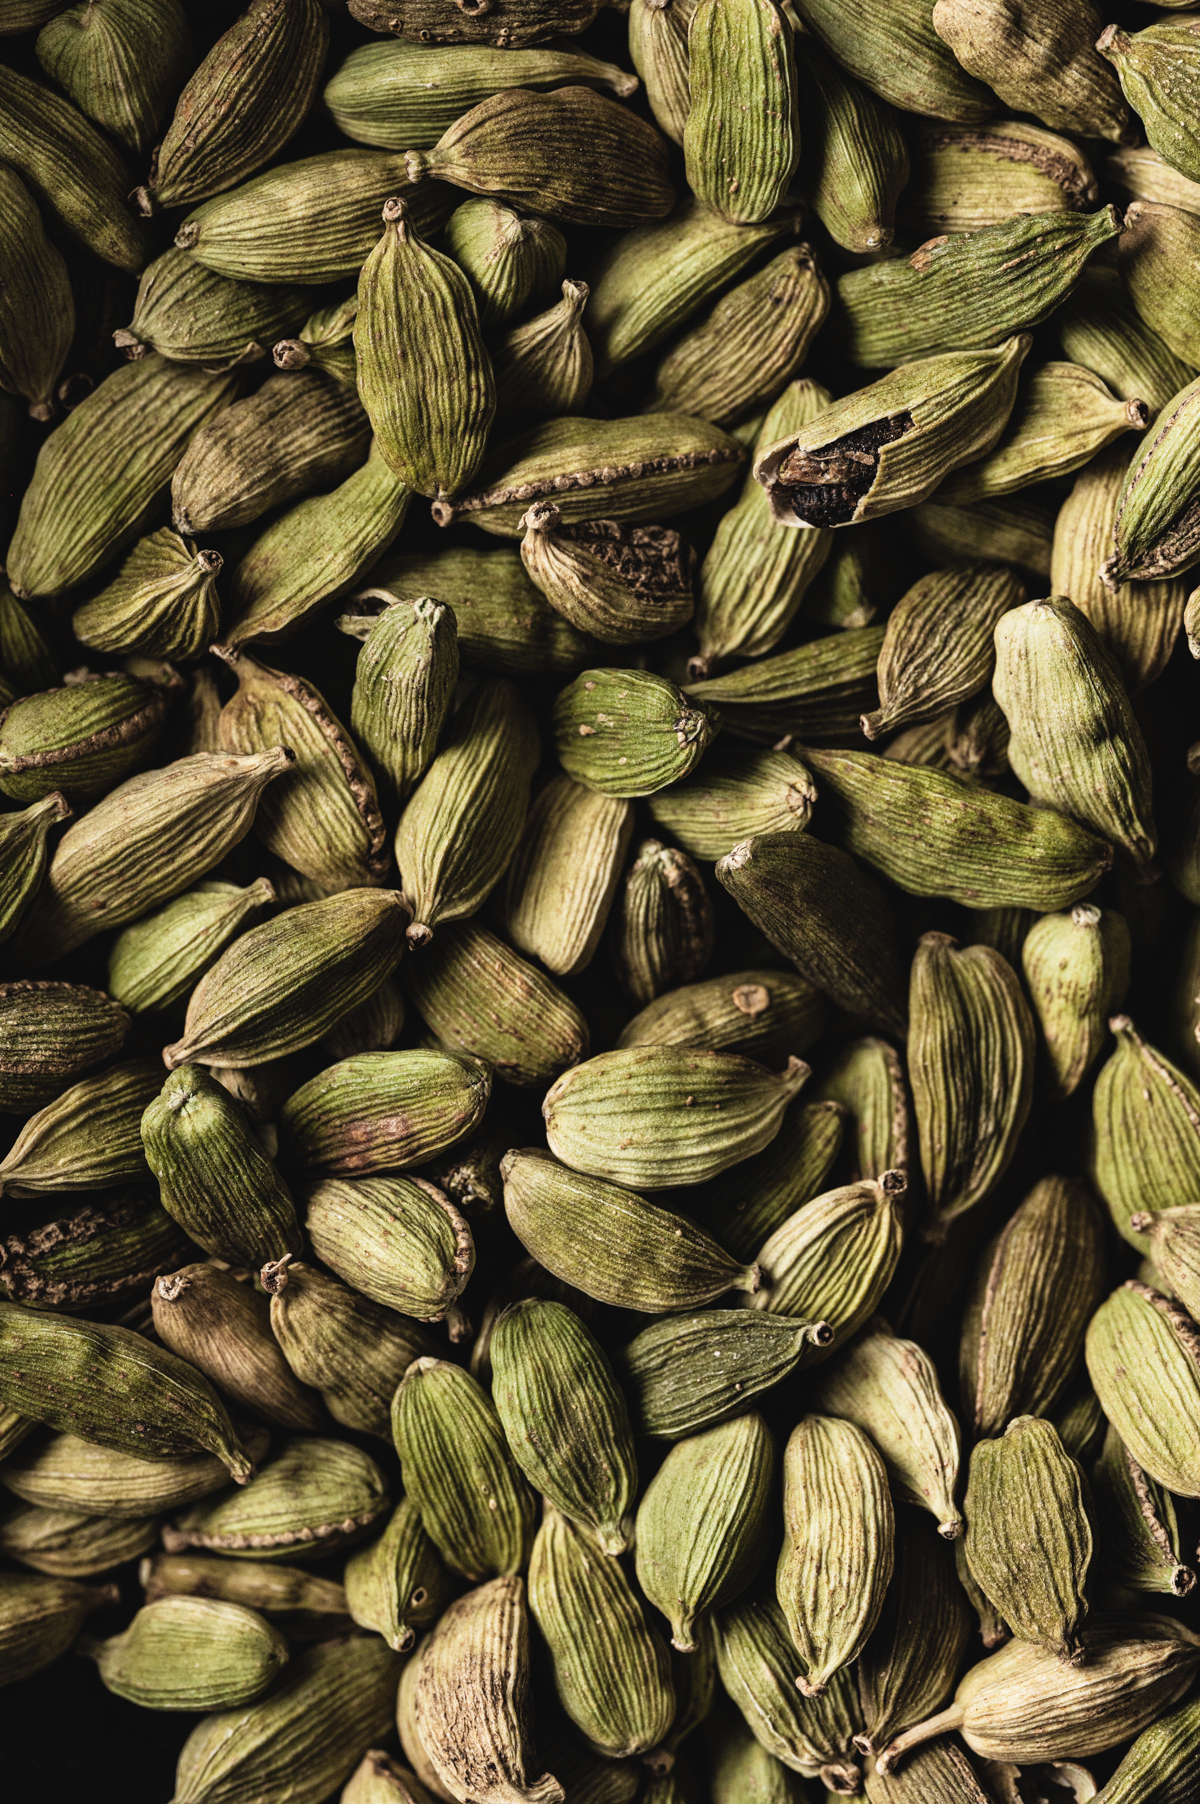 A close up of a lot of whole cardamom pods.